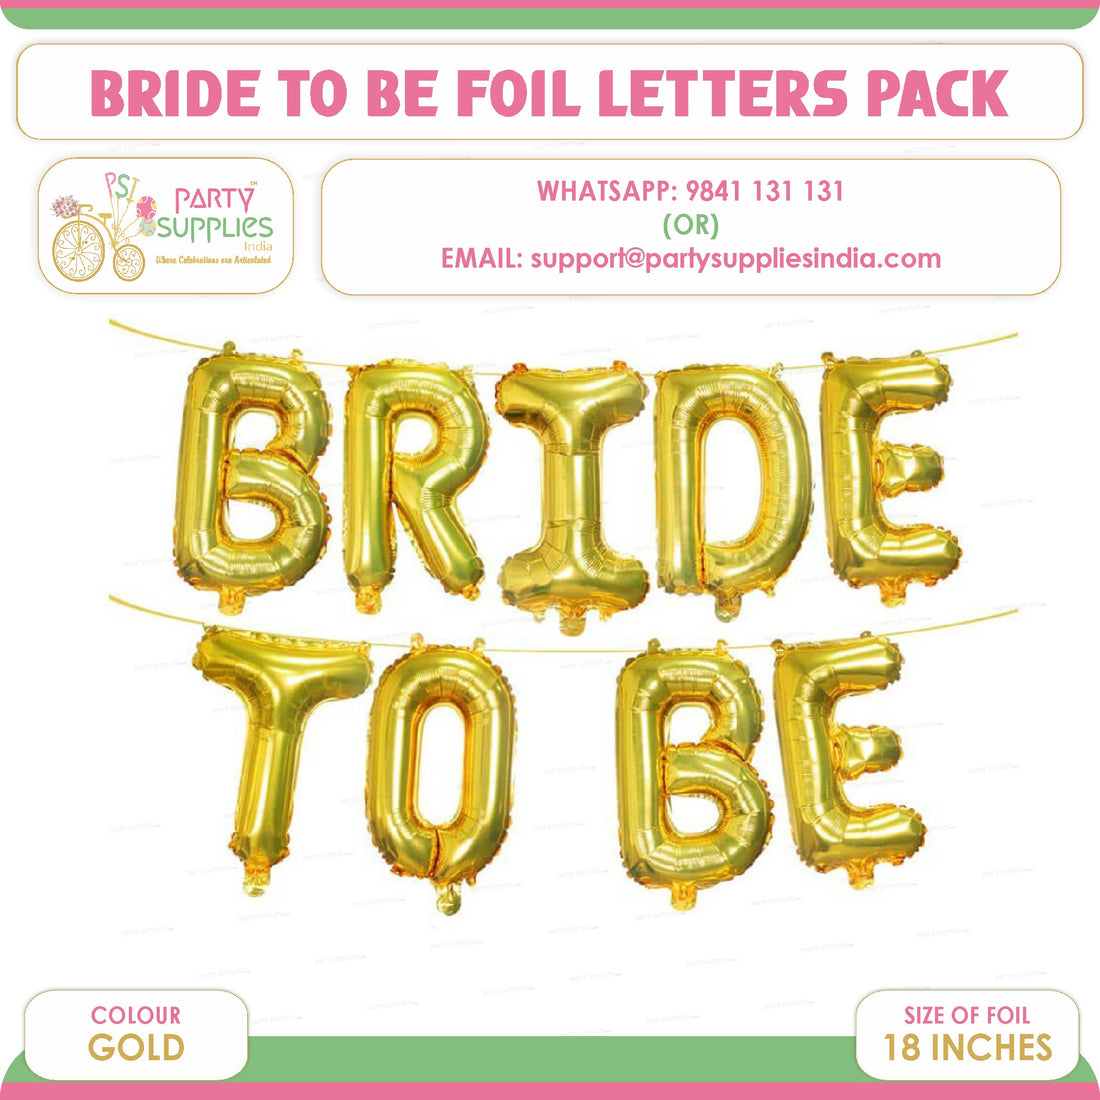 PSI Bride to Be Gold Foil Balloons Letters Pack